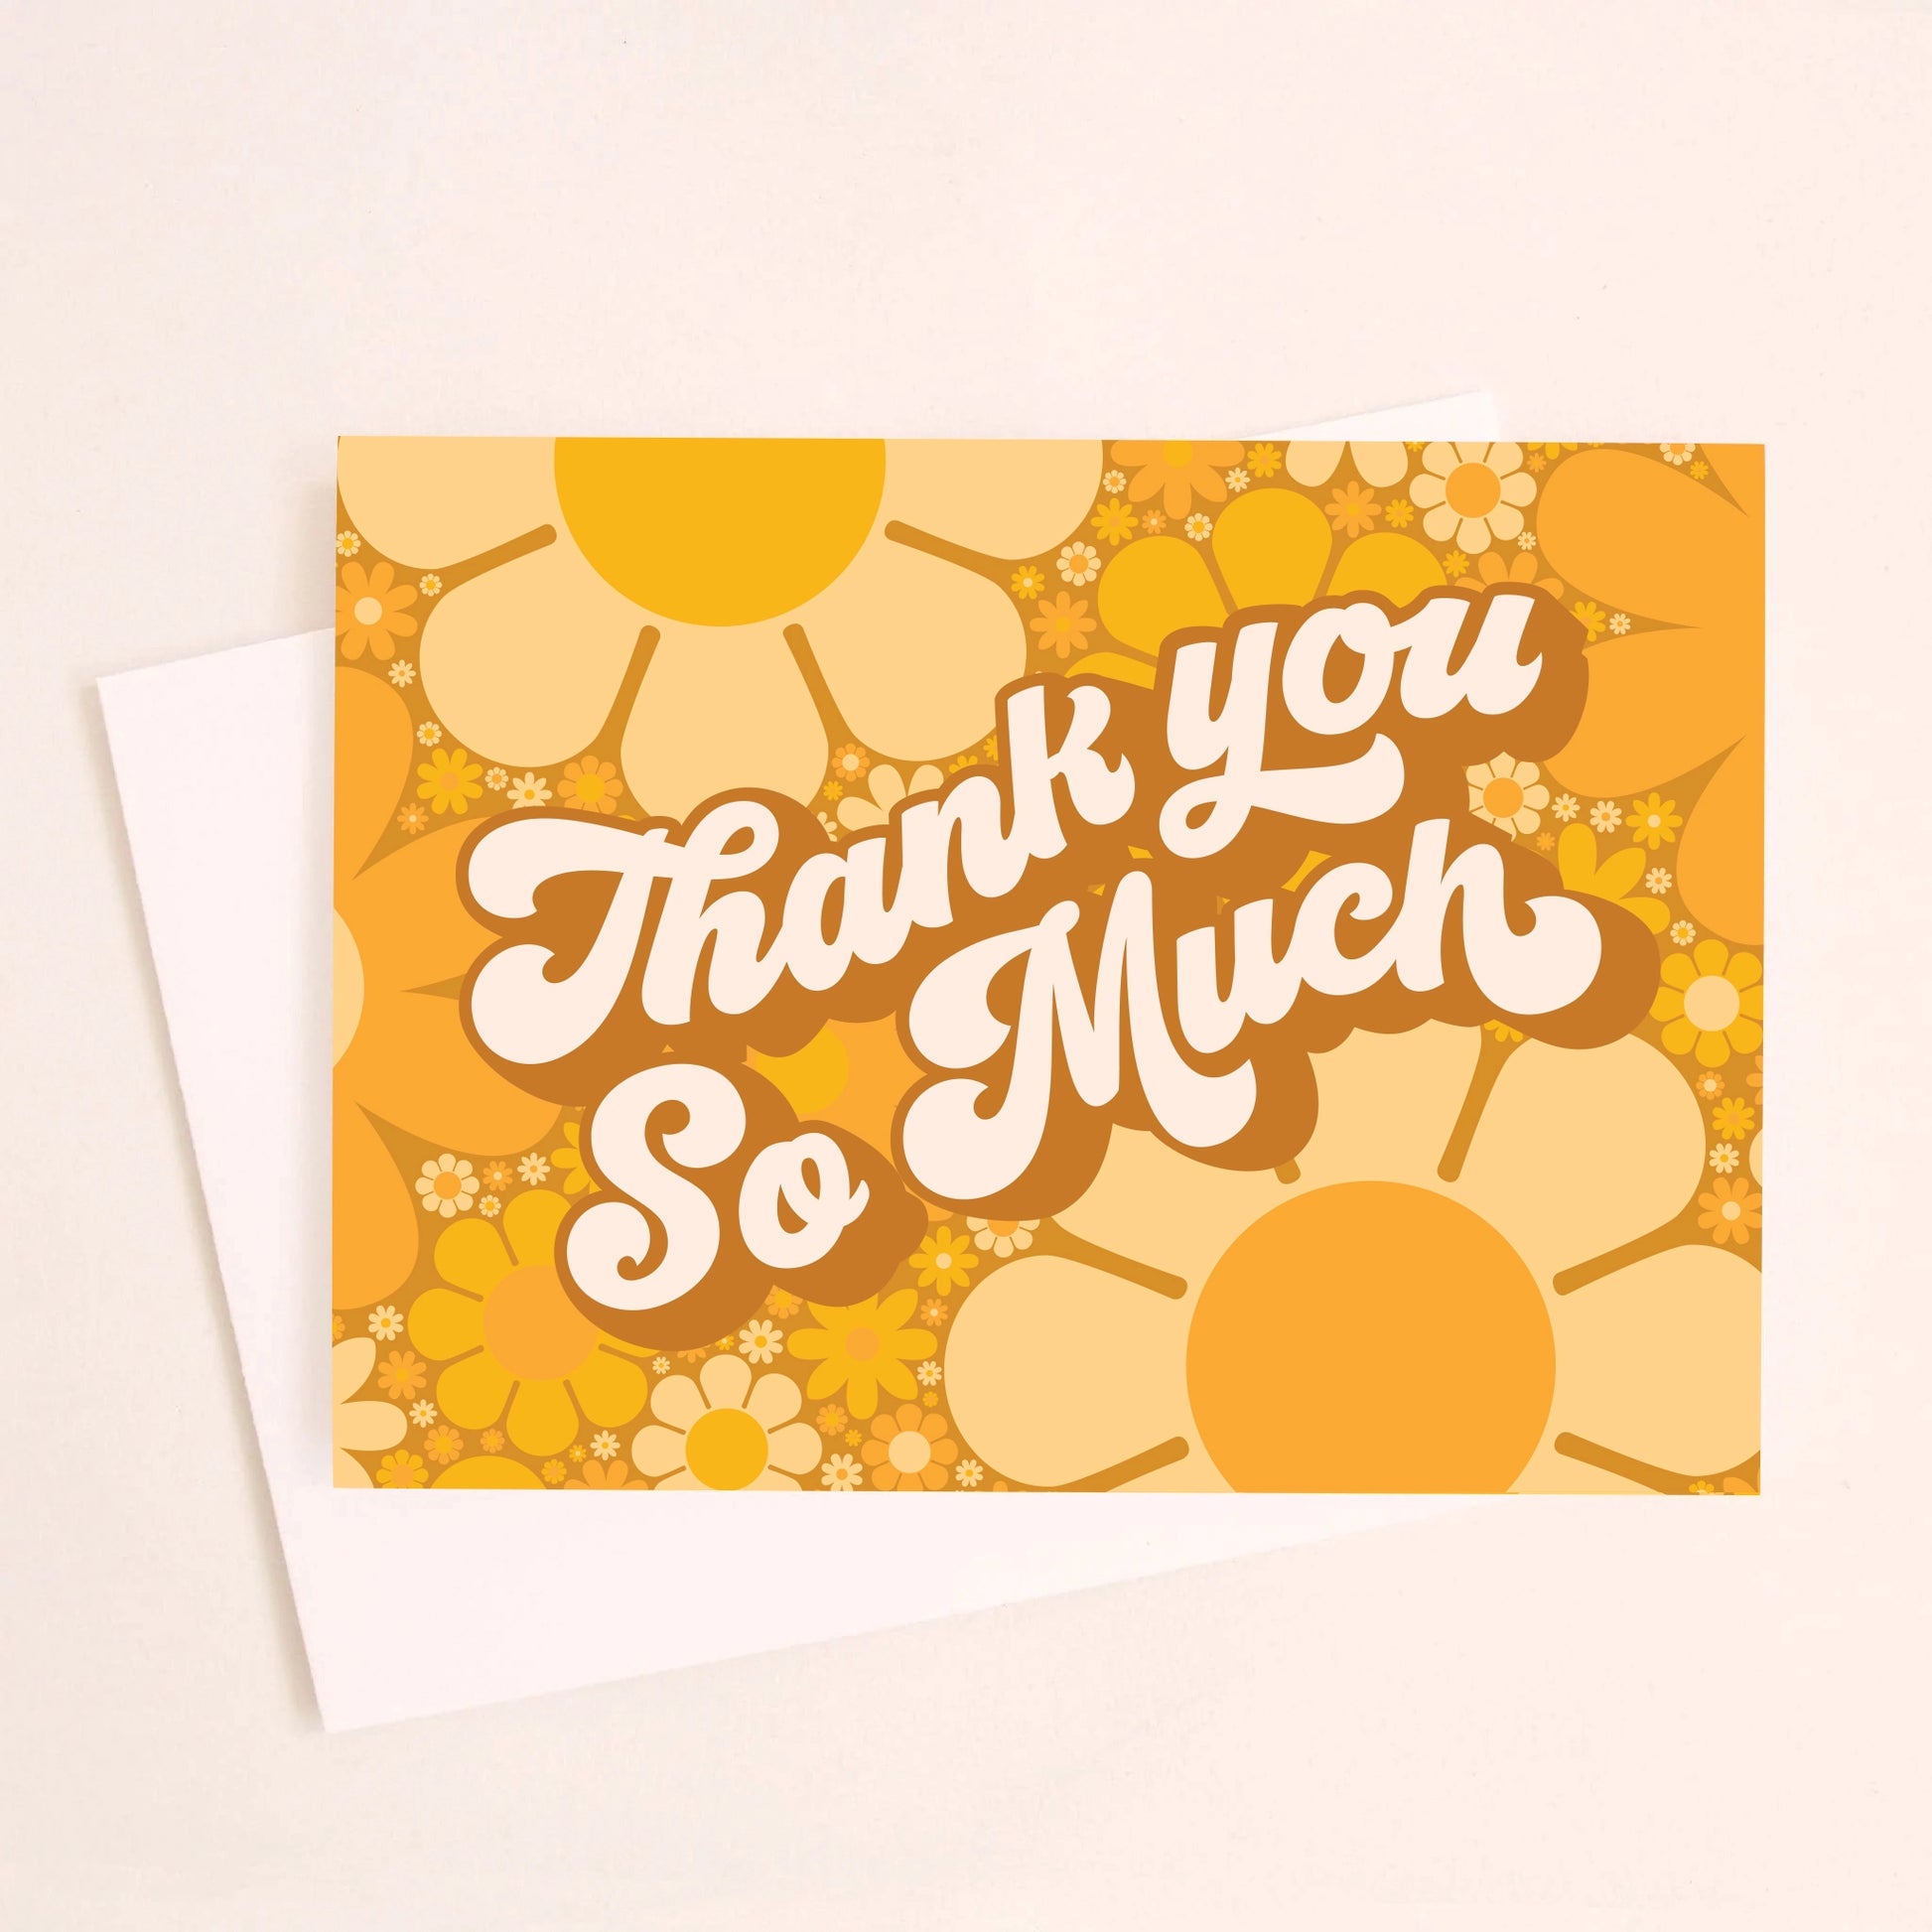 On an ivory background is a daisy printed thank you card with shades of orange and yellow along with white text in the center that reads, "Thank You So Much". 